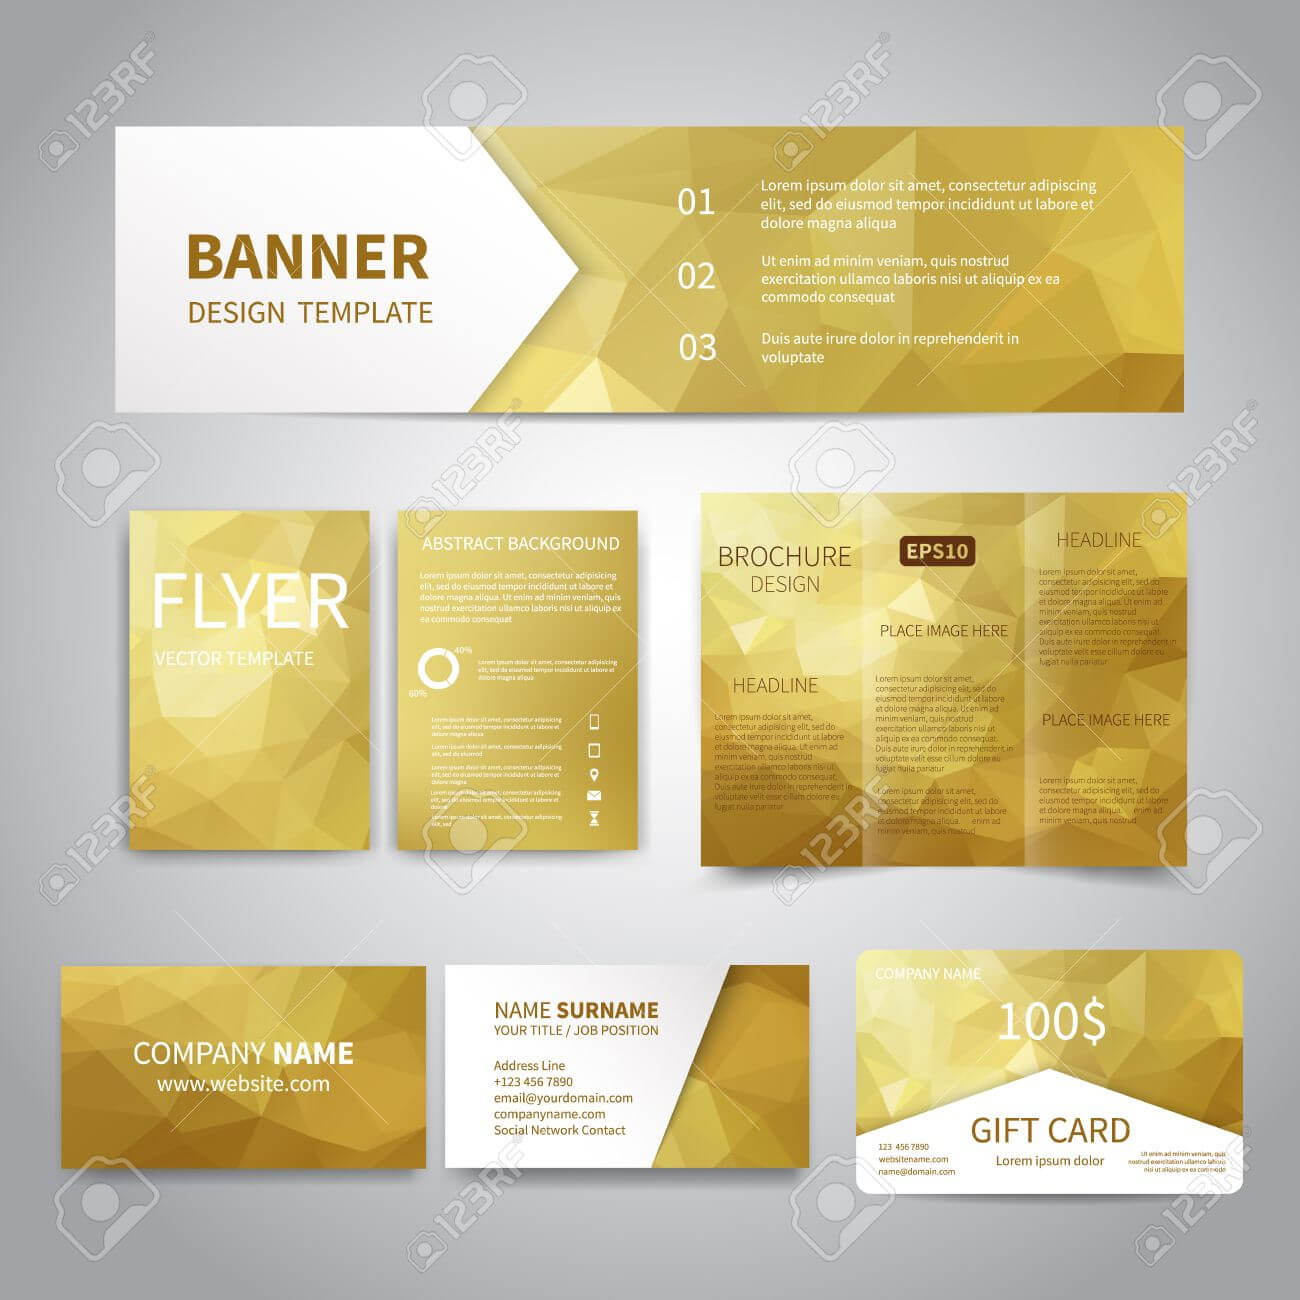 Banner, Flyers, Brochure, Business Cards, Gift Card Design Templates.. In Advertising Cards Templates